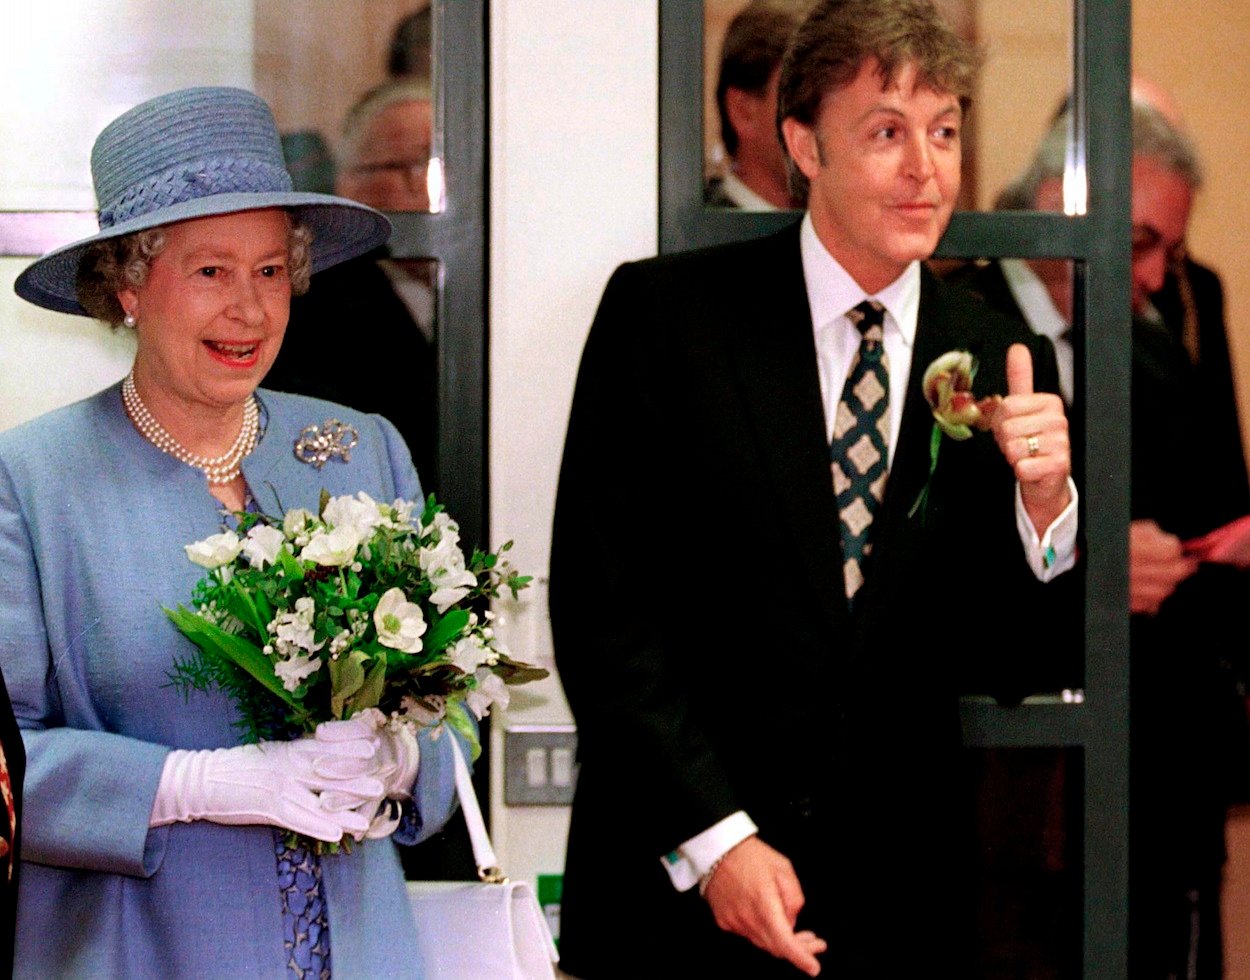 Queen Elizabeth II (left) and Paul McCartney at a 1996 event in Liverpool, England, a year before she knighted him.